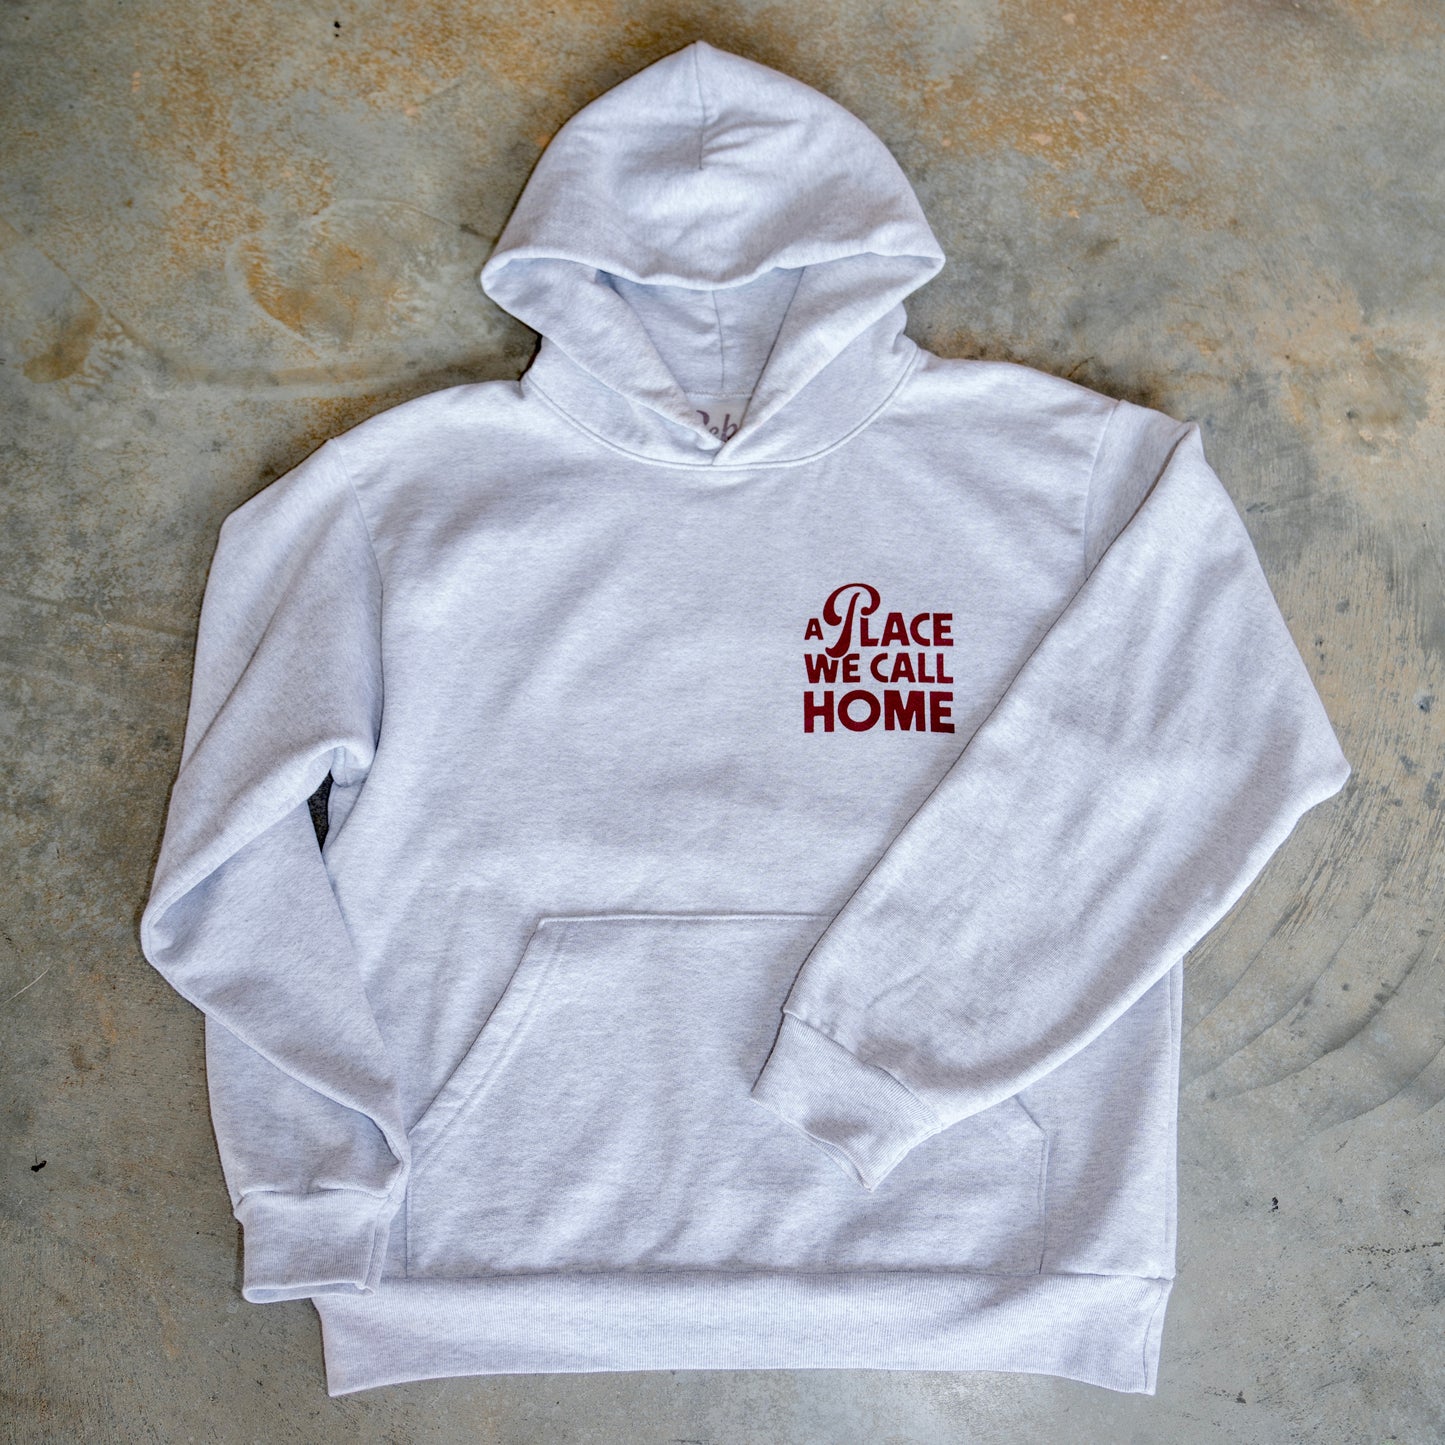 Picked "A Place We Call Home" Hoodie